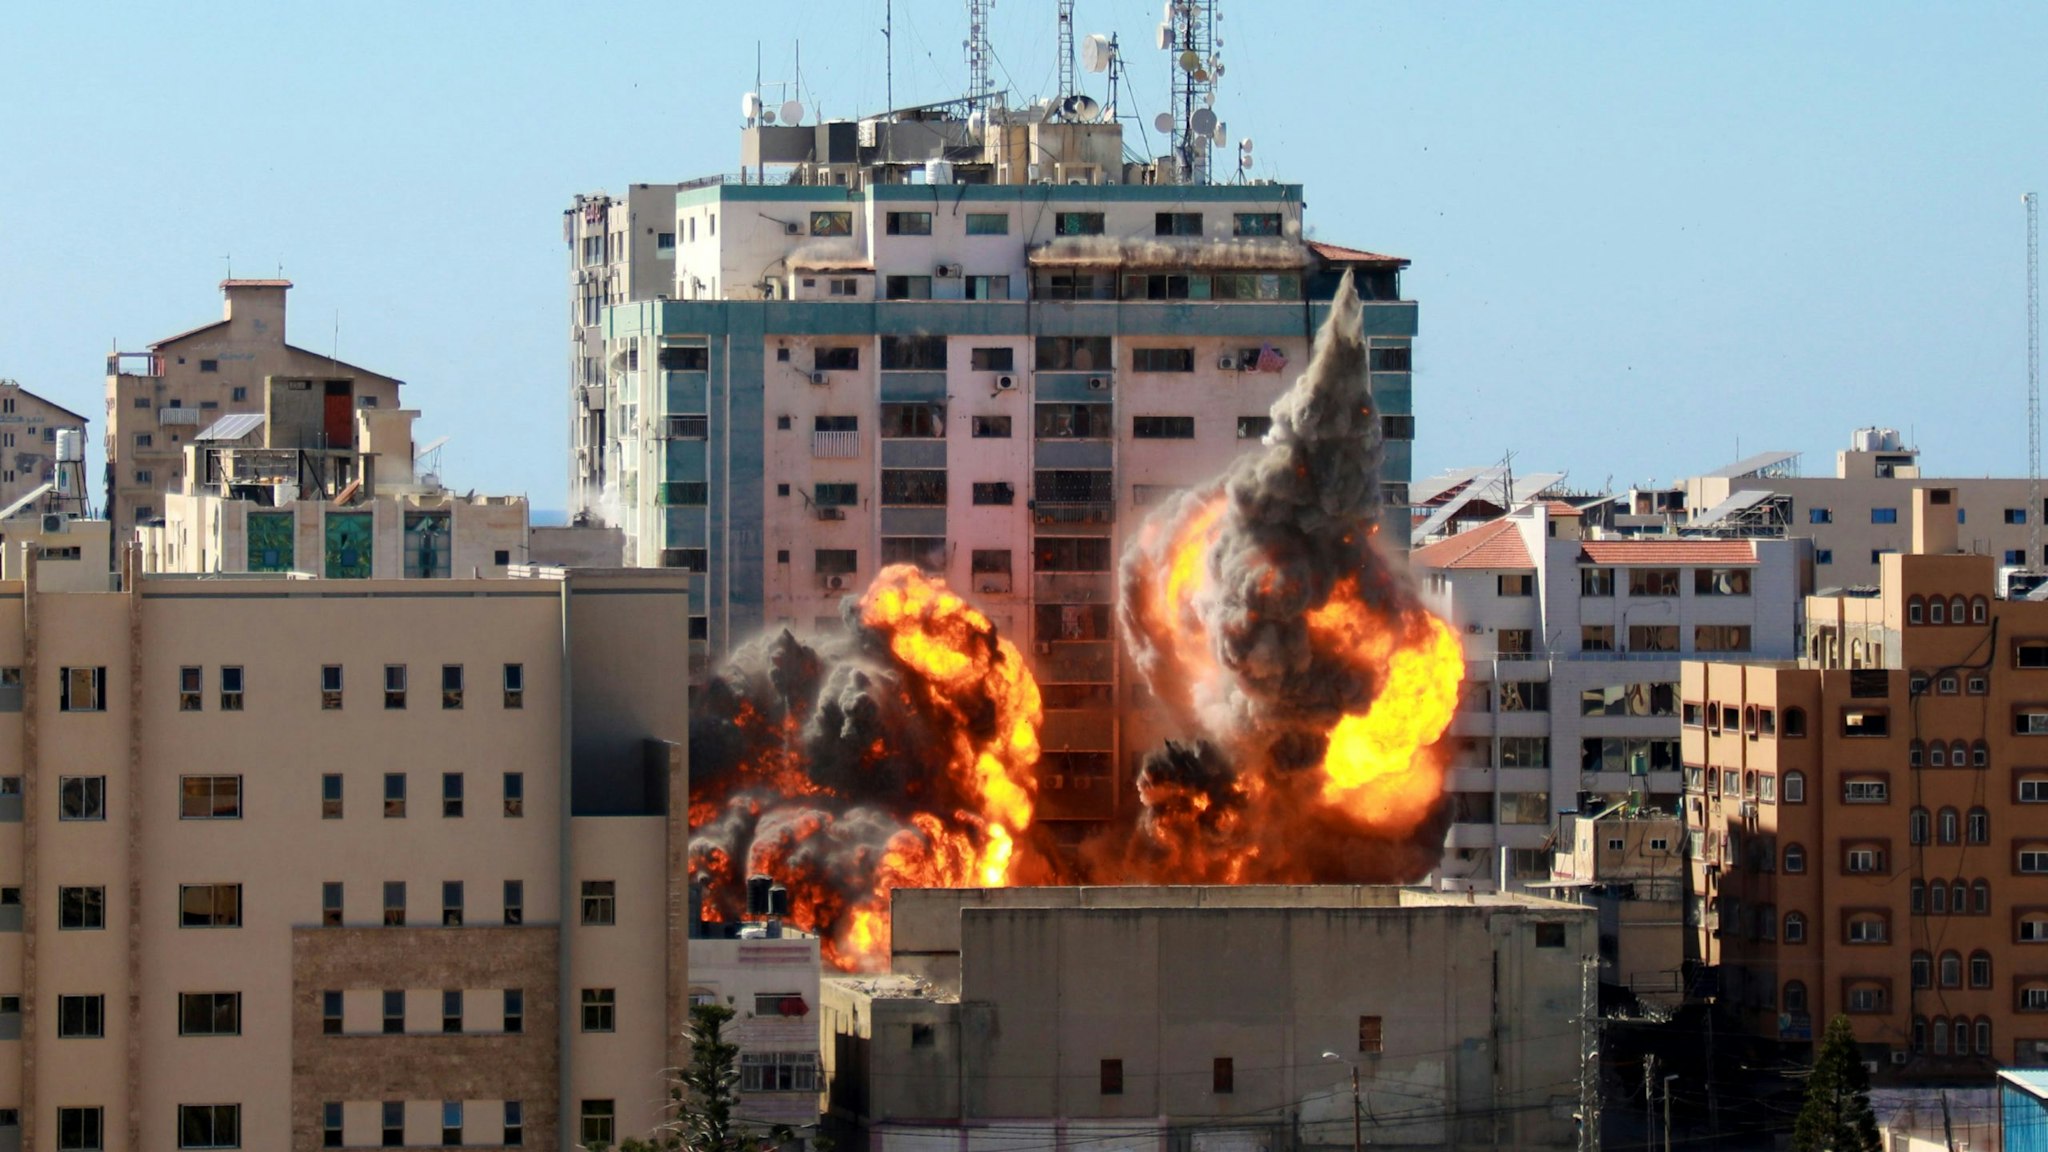 A ball of fire erupts from the Jala Tower as it is destroyed in an Israeli airstrike in Gaza city controlled by the Palestinian Hamas movement, on May 15, 2021. - Israeli air strikes pounded the Gaza Strip, killing 10 members of an extended family and demolishing a key media building, while Palestinian militants launched rockets in return amid violence in the West Bank. Israel's air force targeted the 13-floor Jala Tower housing Qatar-based Al-Jazeera television and the Associated Press news agency.